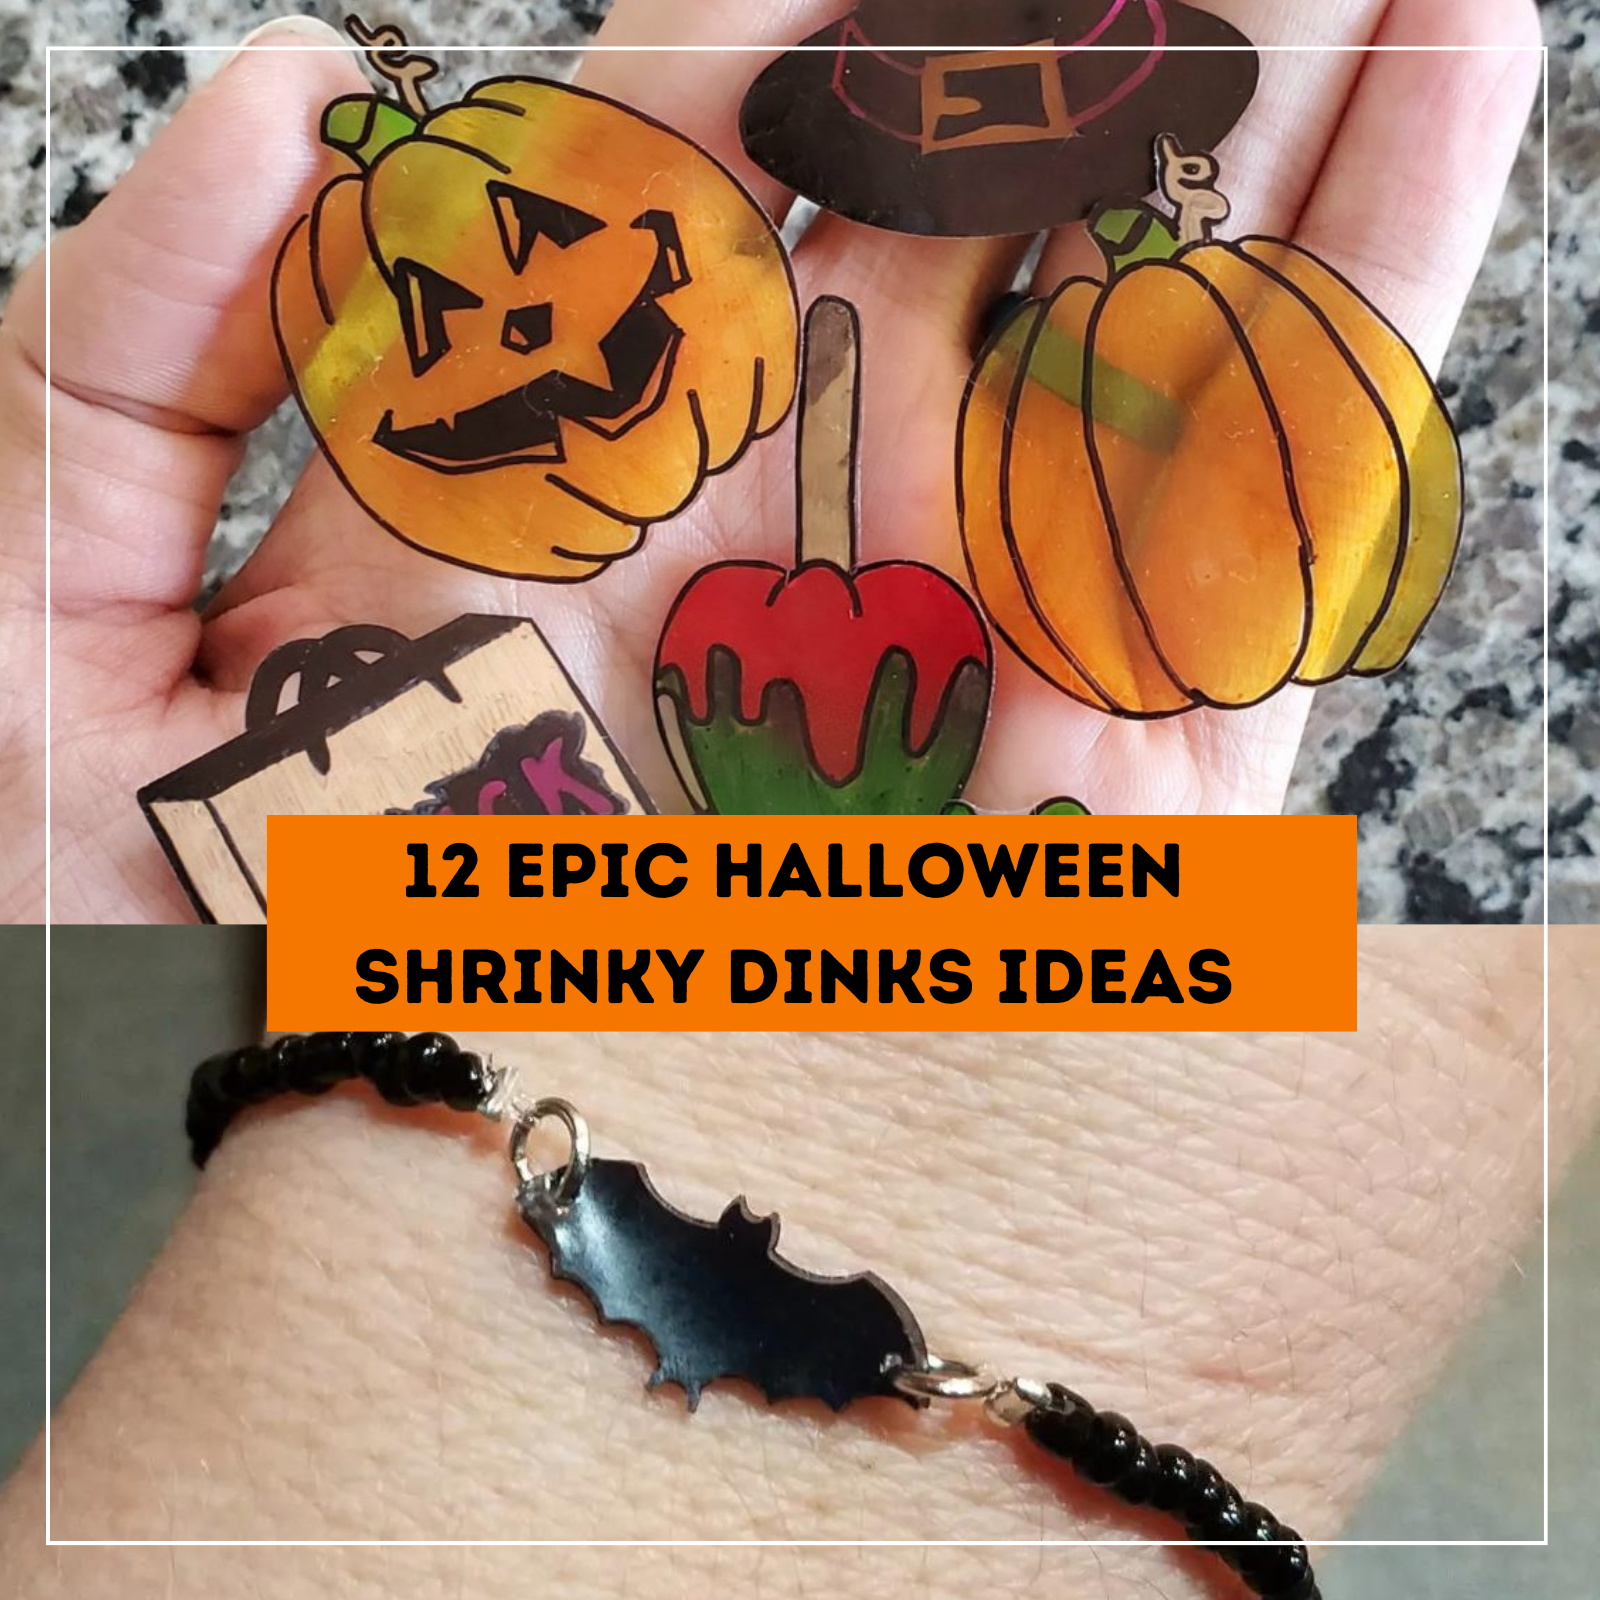 12 Epic Halloween Shrinky Dinks Ideas for Adults & Kids